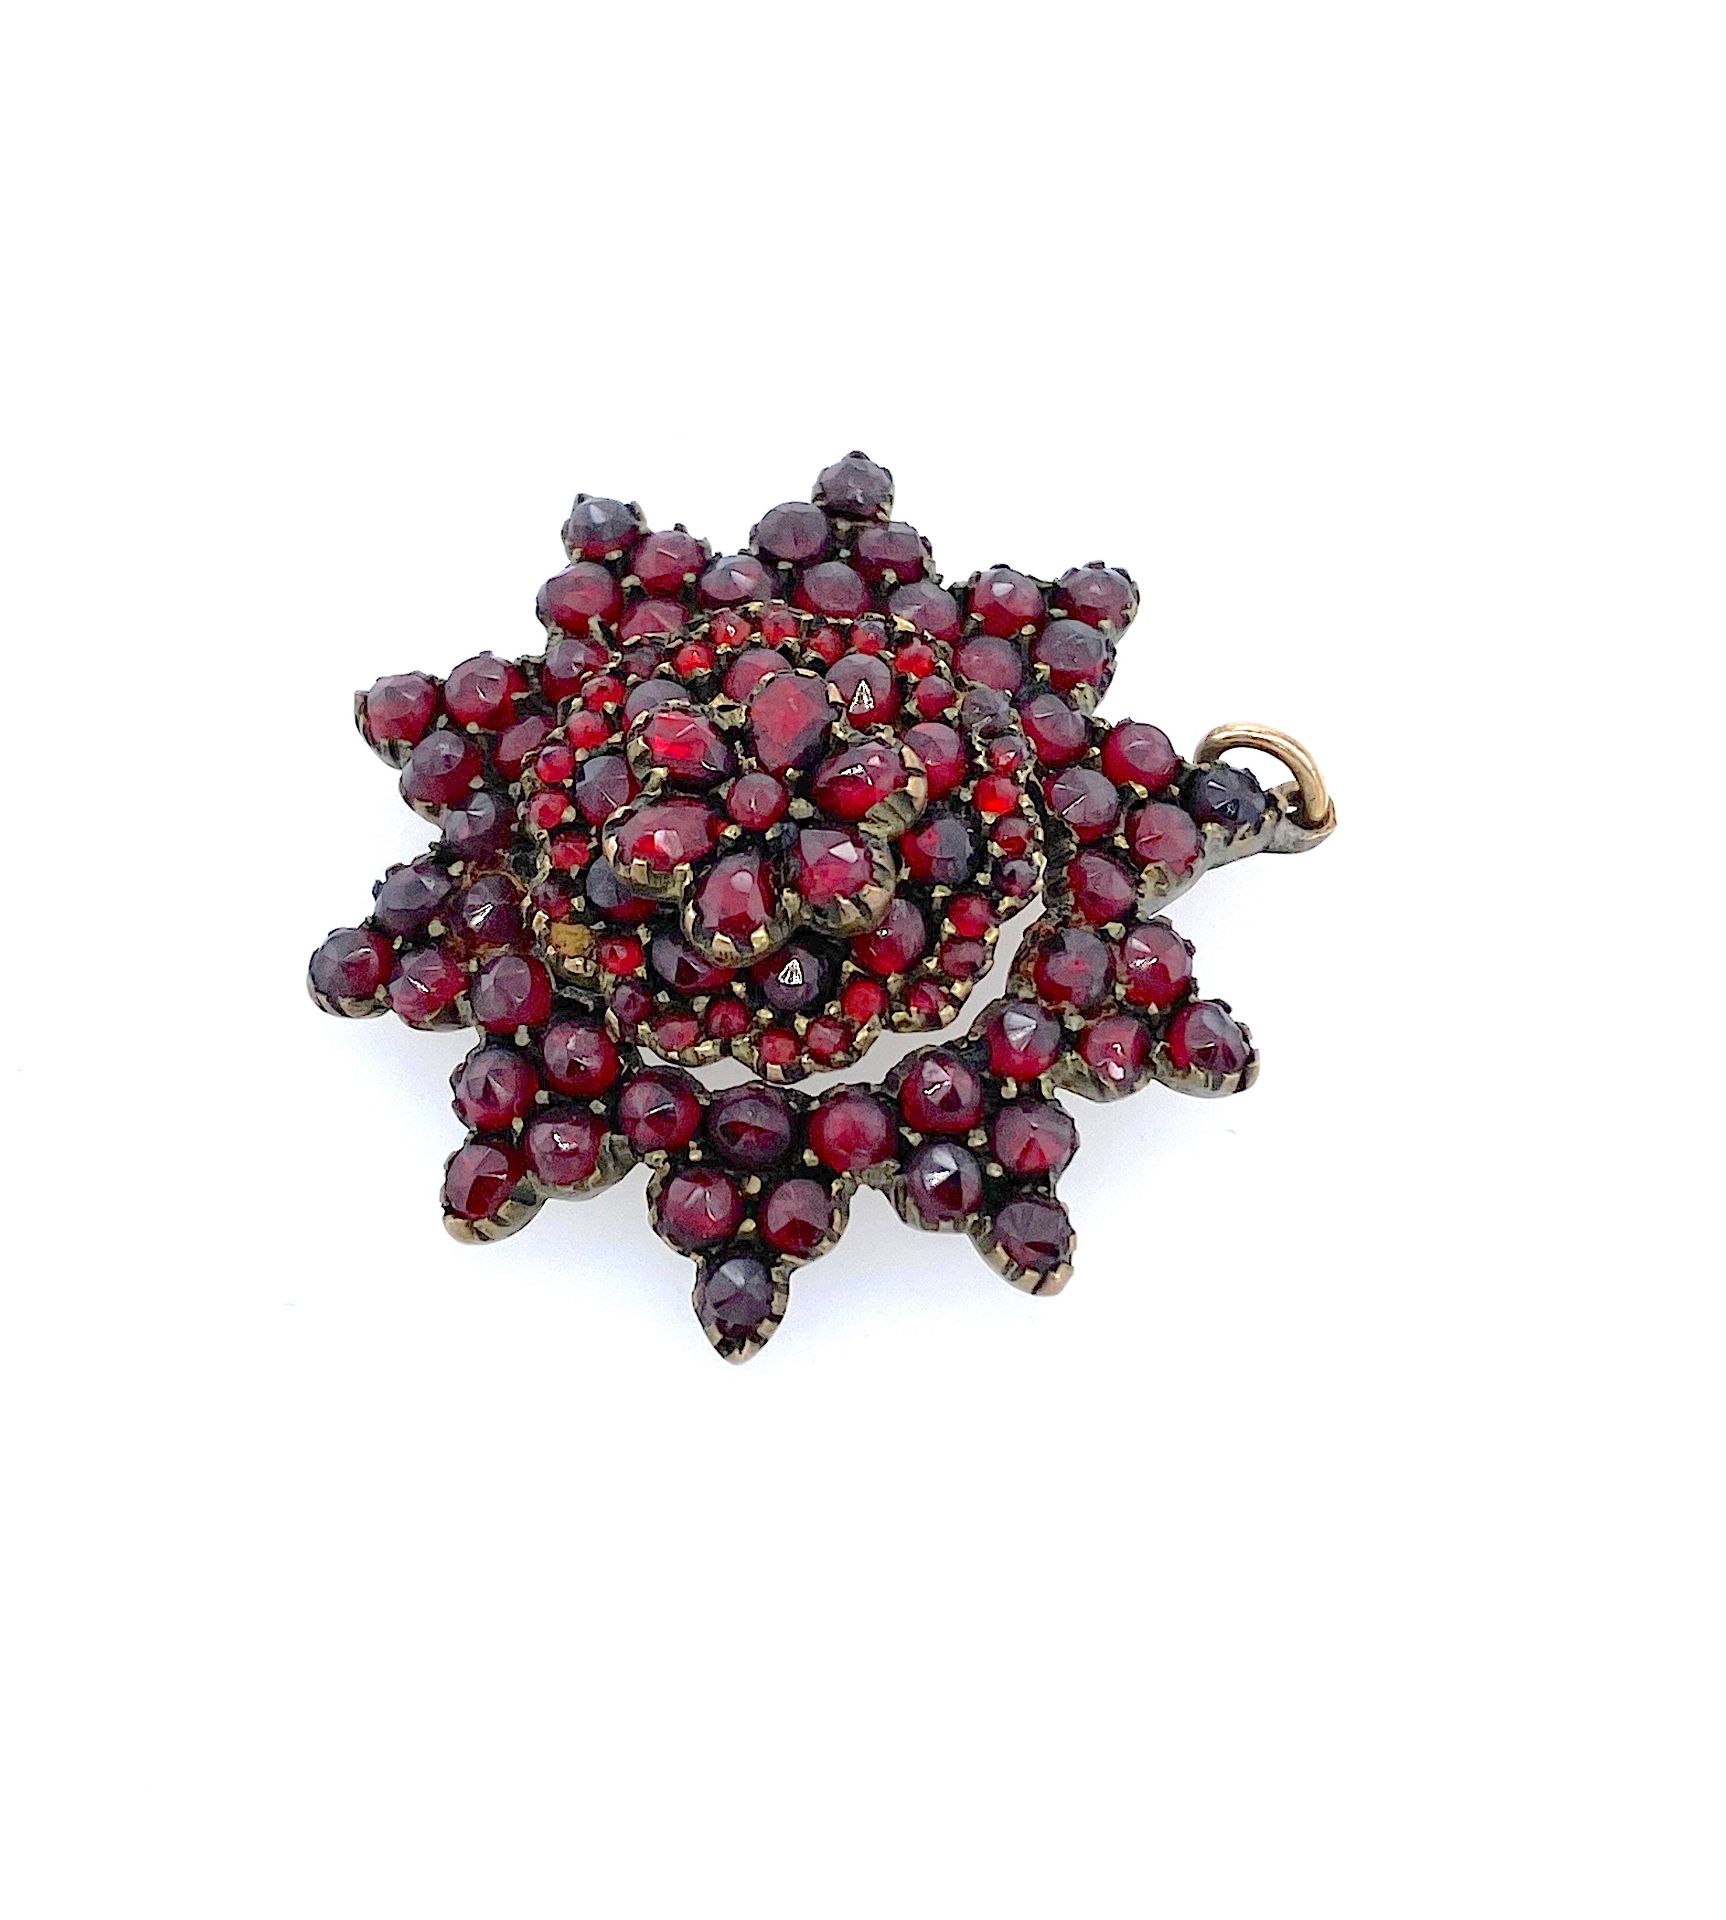 Vintage pendant with garnets - Image 2 of 3